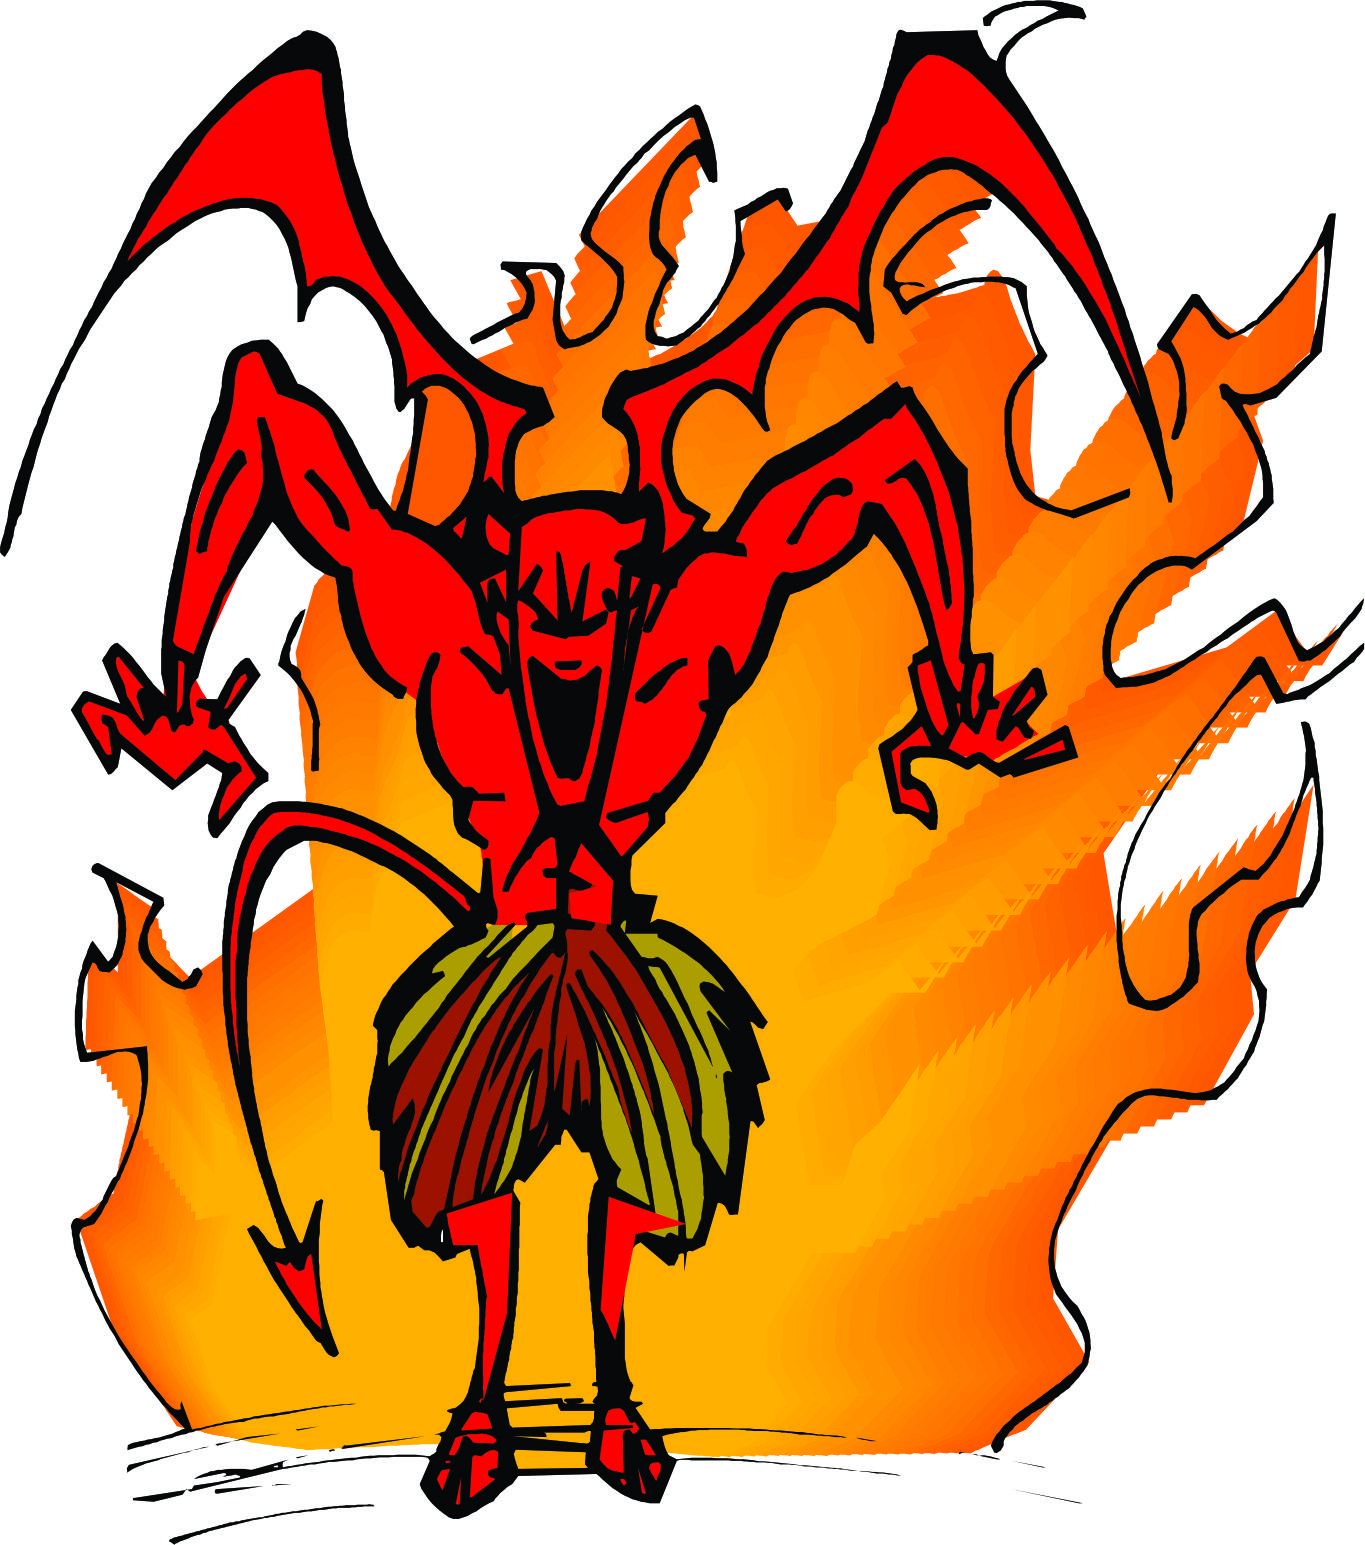 View larger image · Devil with fire 2